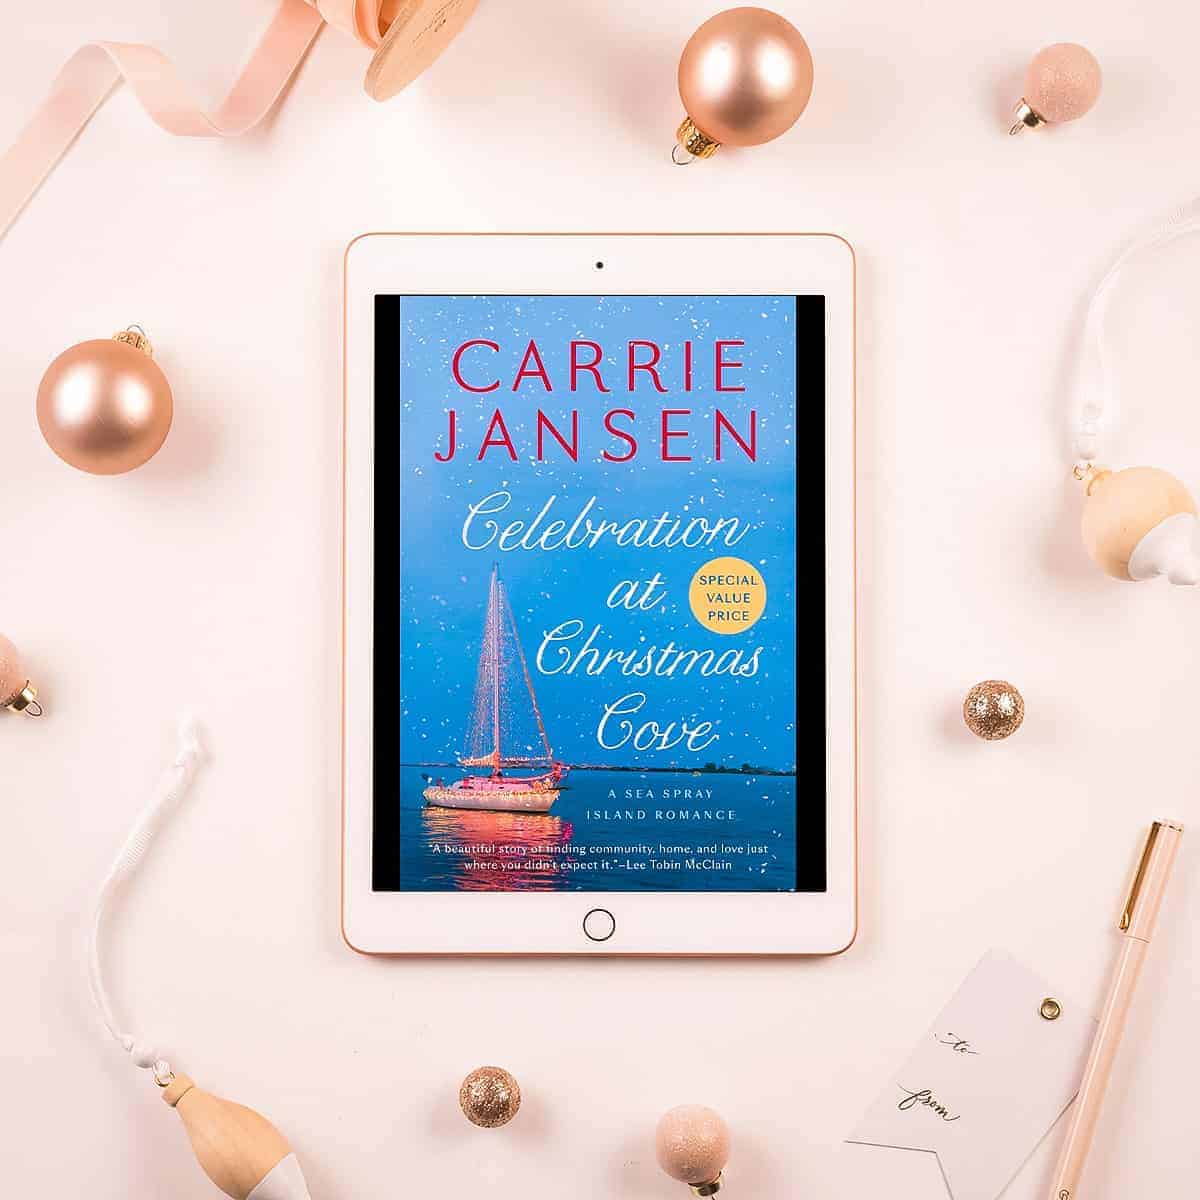 Enjoy a Snippet of Celebration at Christmas Cove by Carrie Jansen!